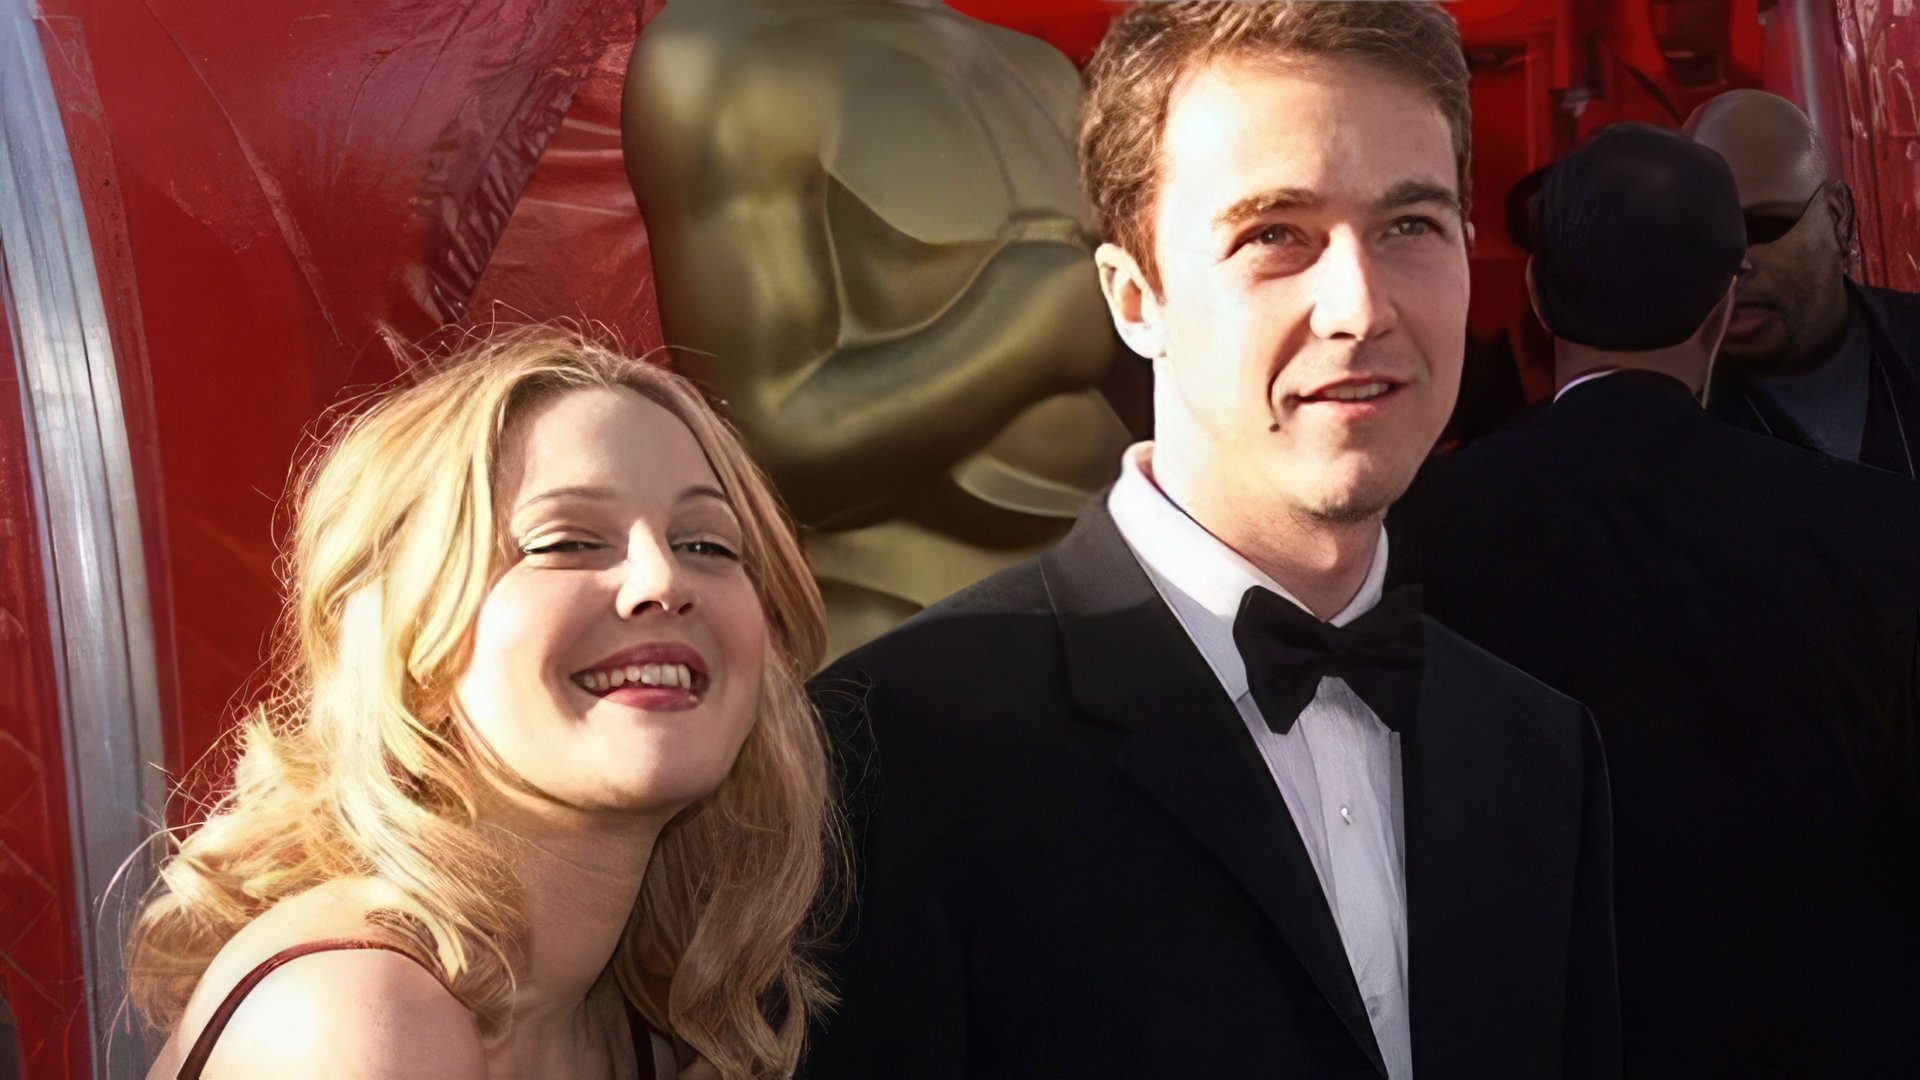 Edward Norton and Drew Barrymore